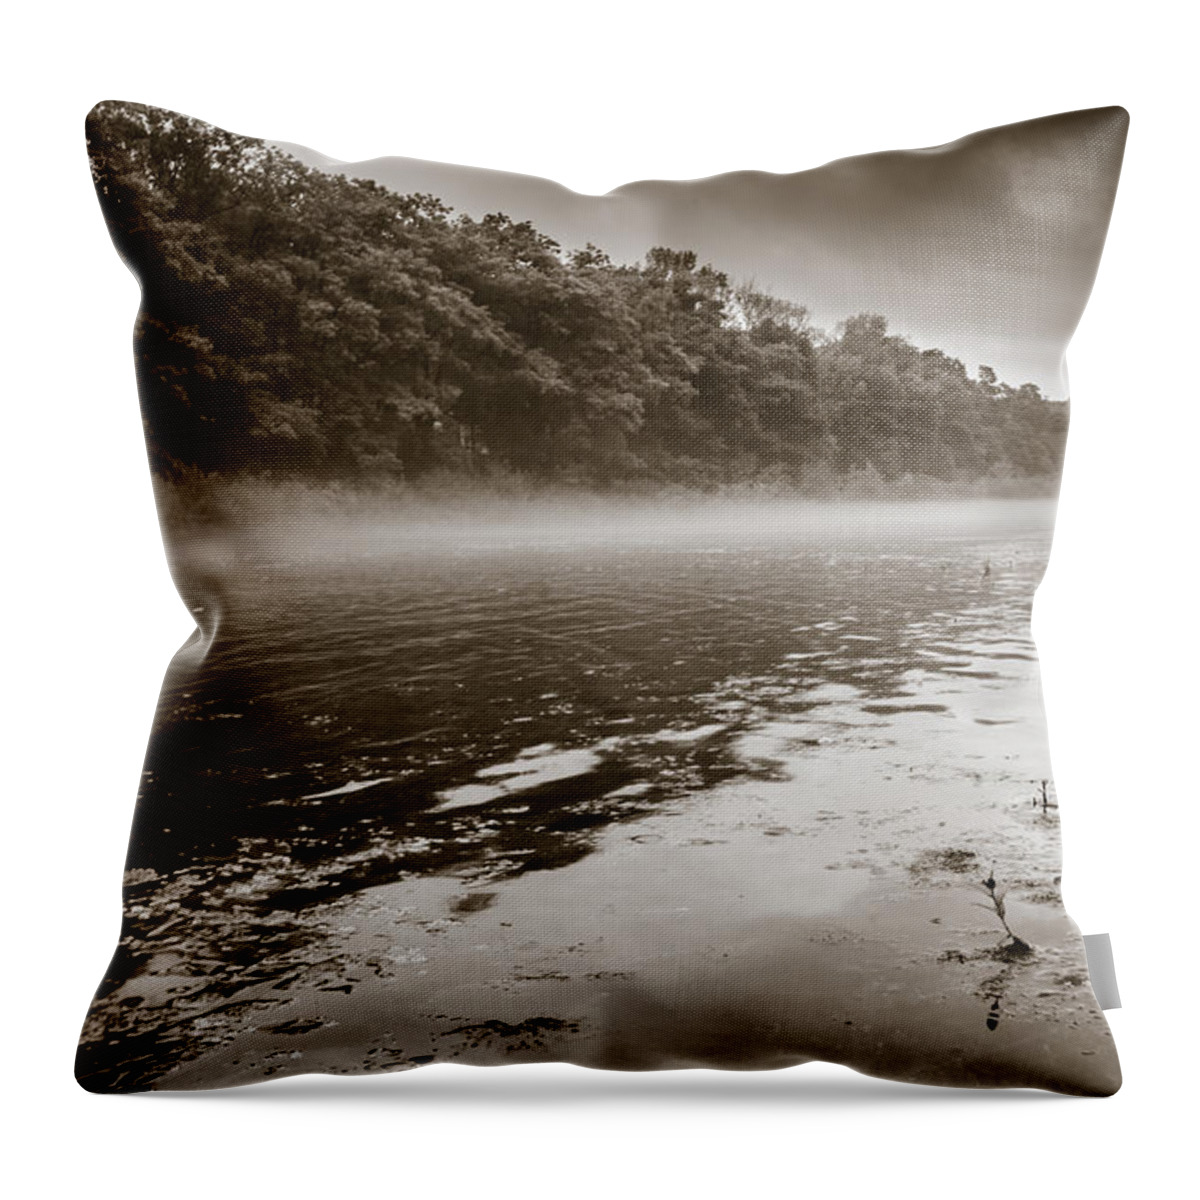 River Throw Pillow featuring the photograph Misty River by Robert McKay Jones